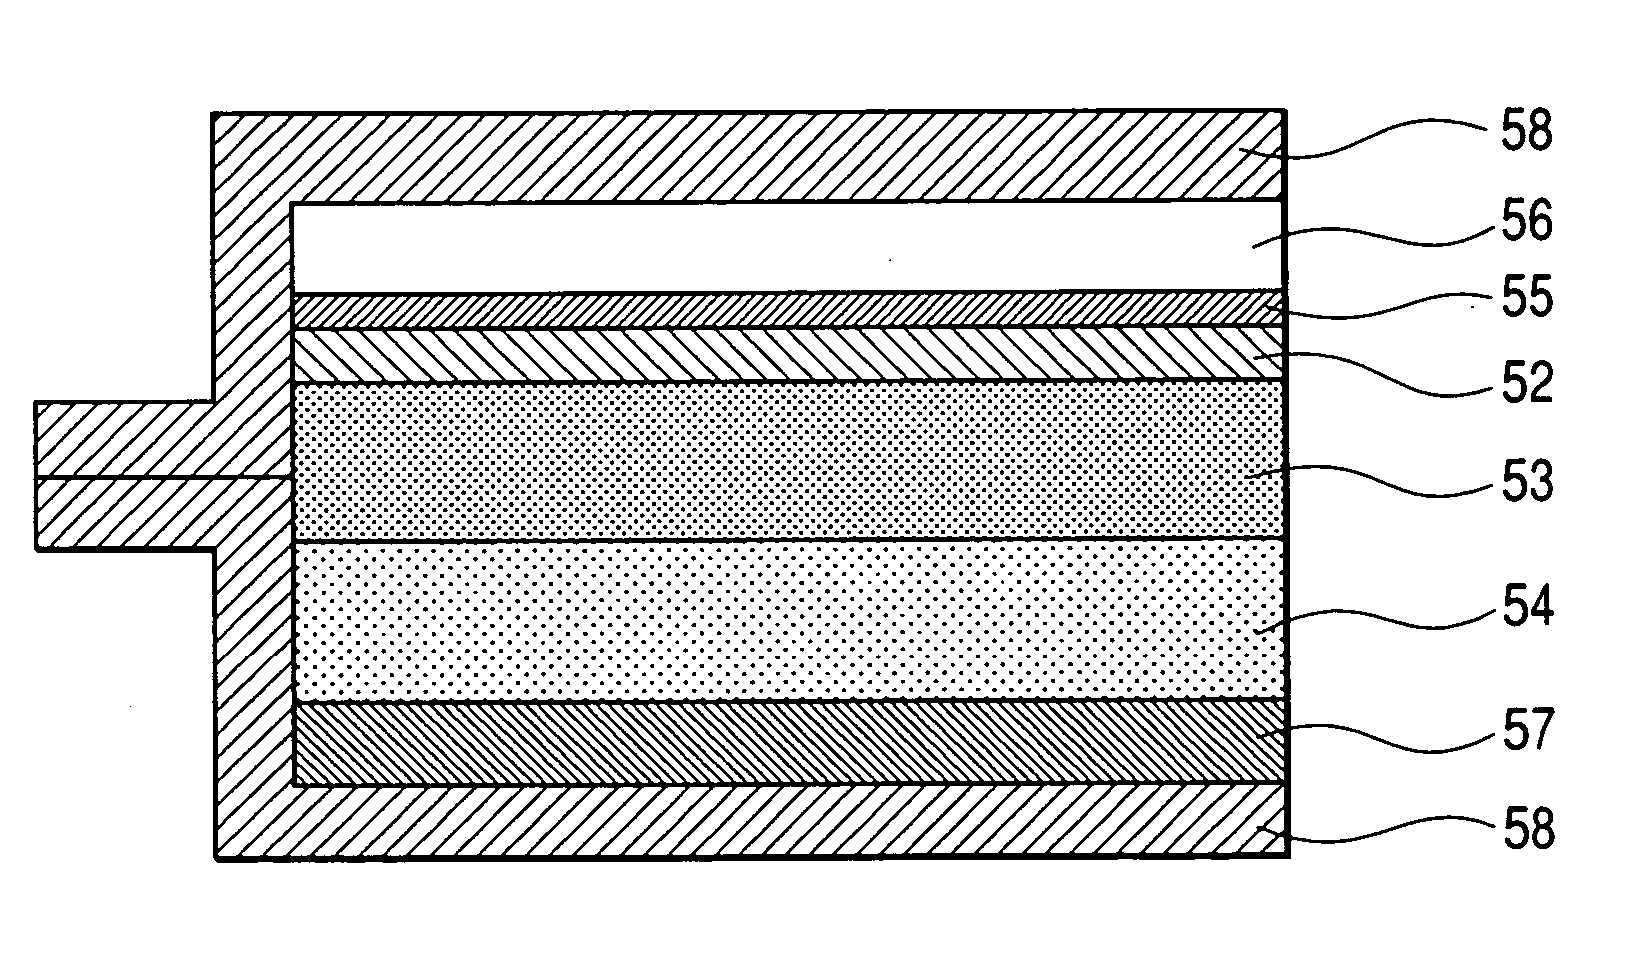 Electroluminescent phosphor, method for producing the same and device containing the same